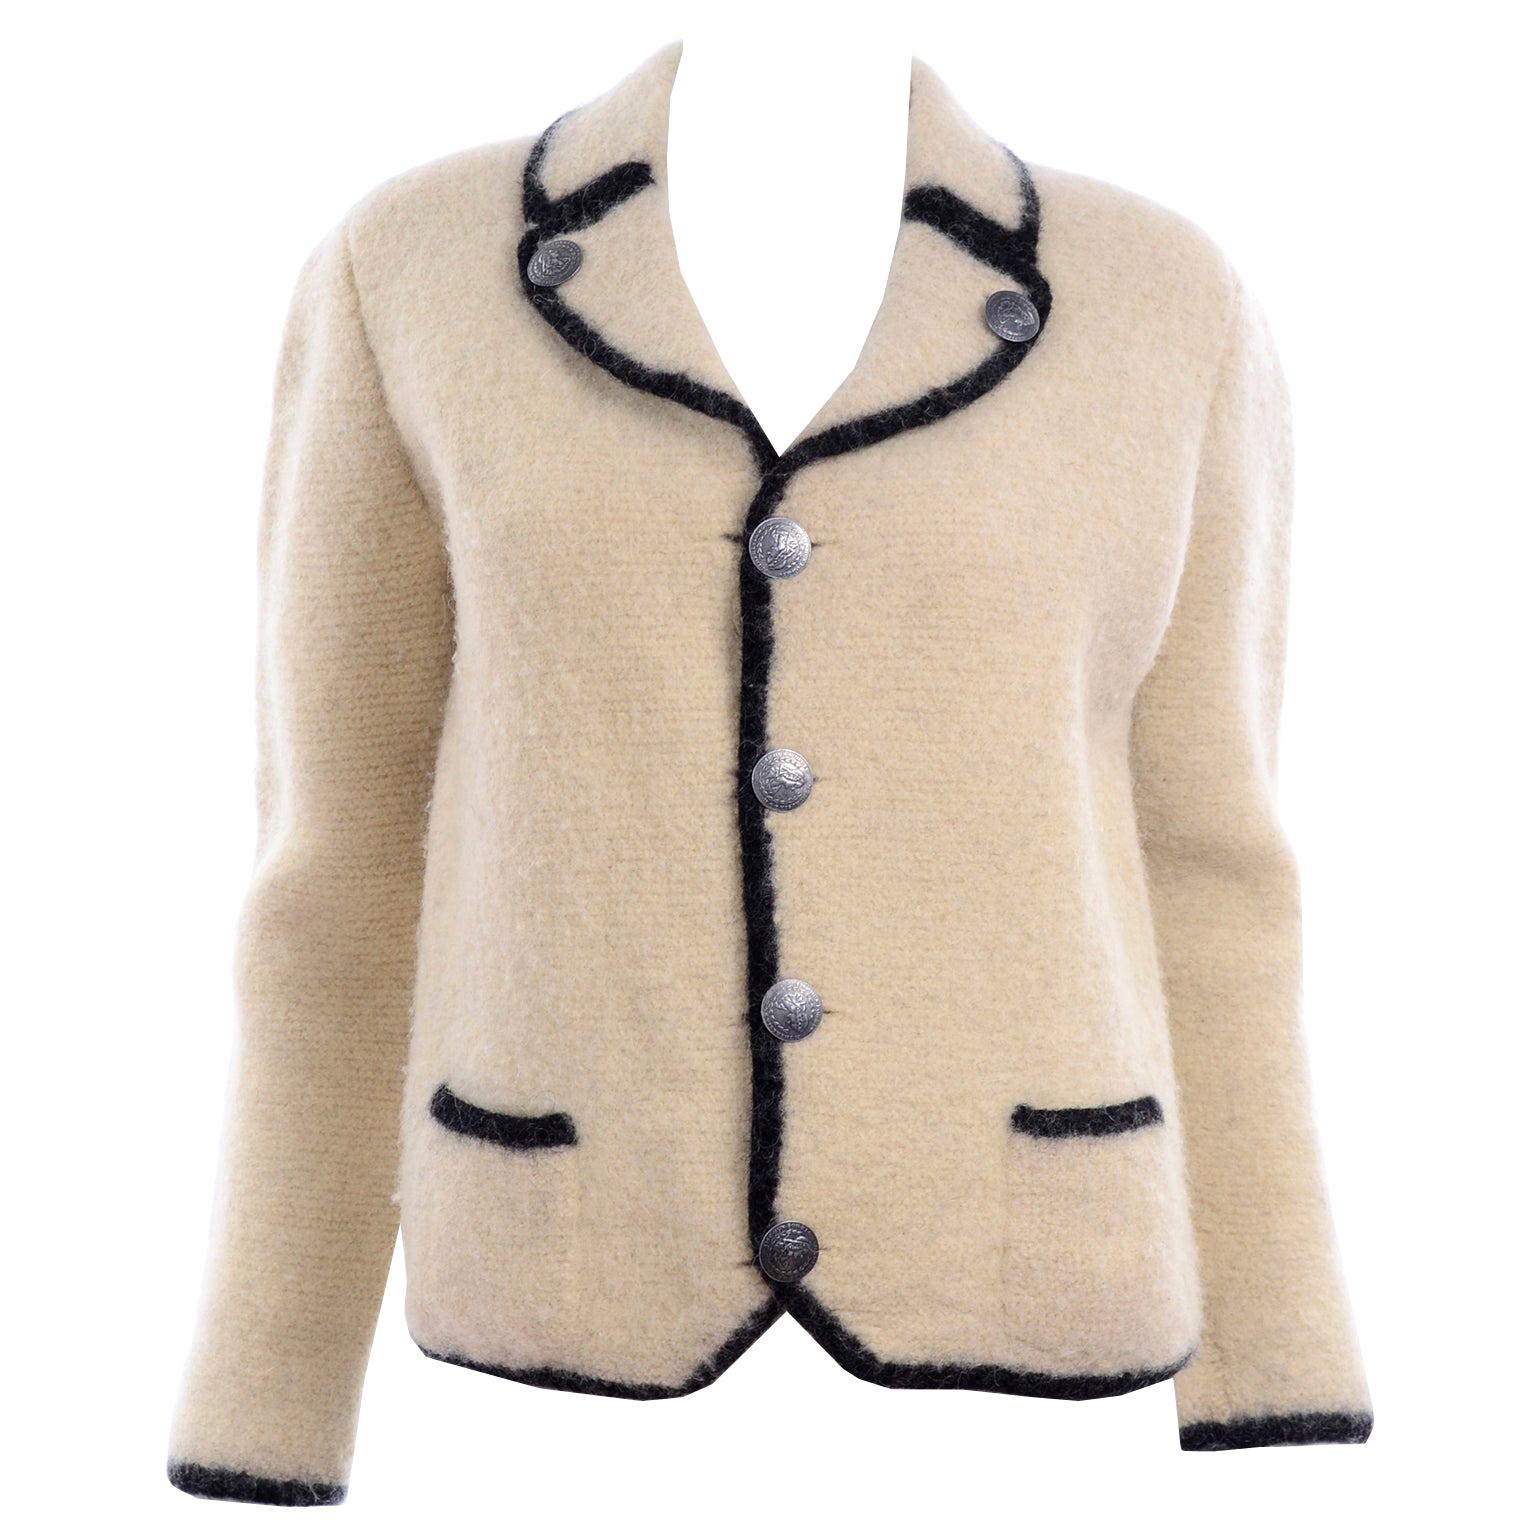 1960s Austrian Vintage Boiled Wool Ivory and Black Jacket With Nickel Buttons